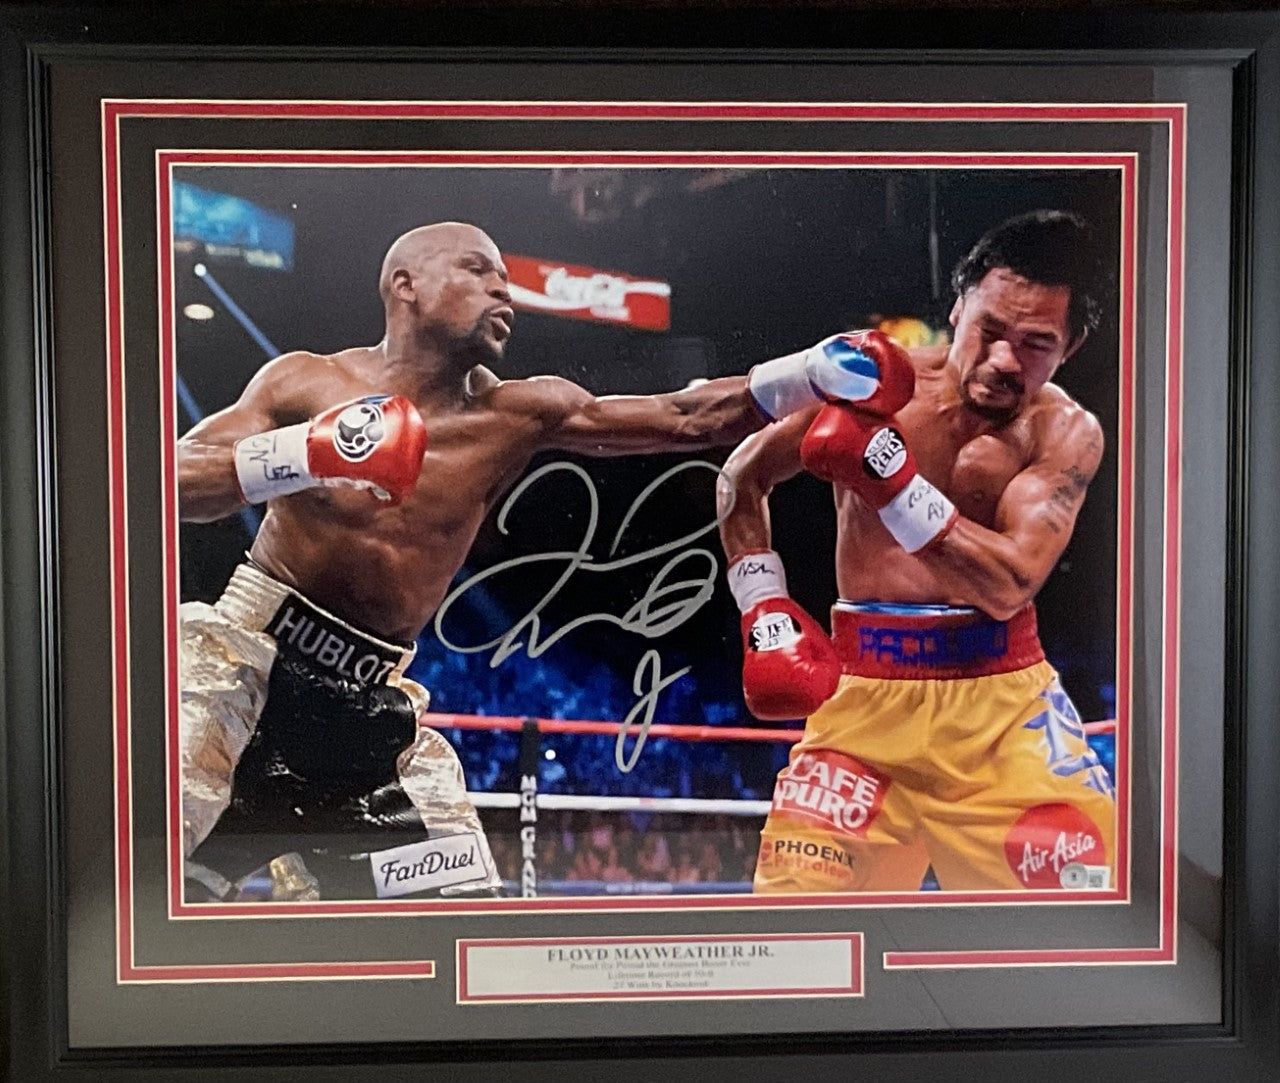 Floyd "Money" Mayweather vs. Pacquiao Autographed 16x20 Photo Framed